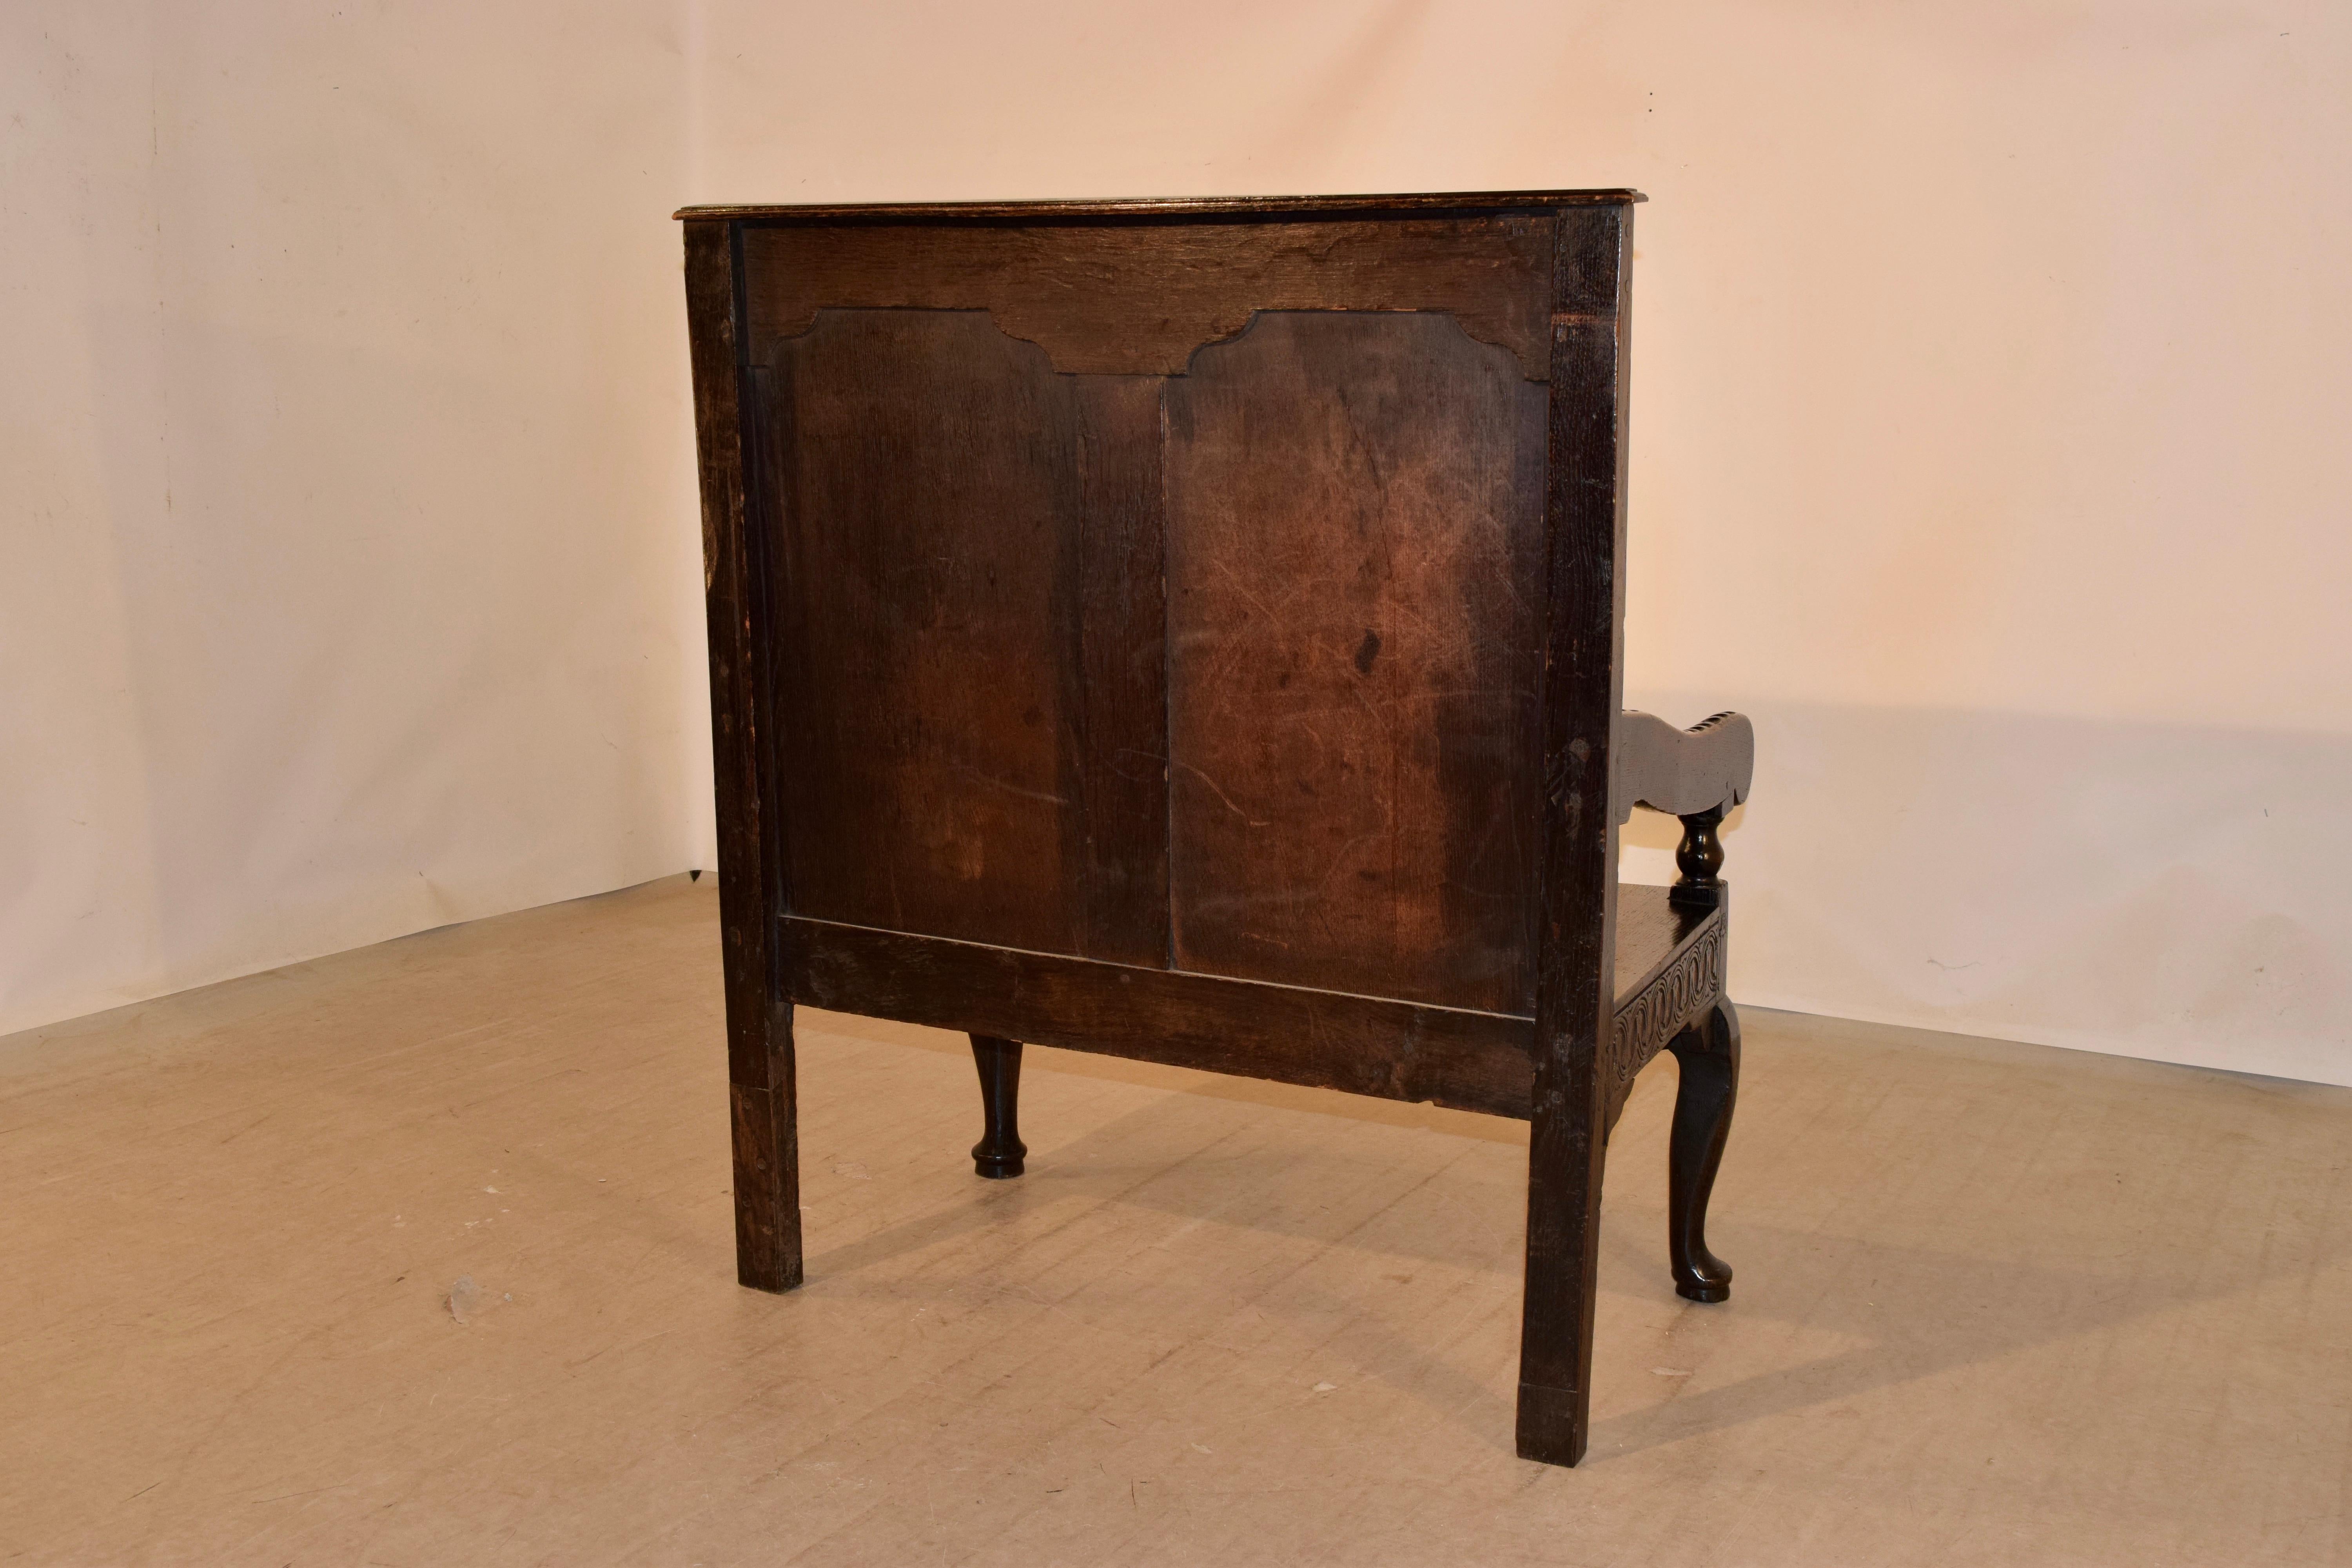 18th century English oak settle with a molded edge at the top following down to a hand carved border with two large hand carved panels in the back, supported on a base with hand carved aprons and simple legs in the back for easy placement against a